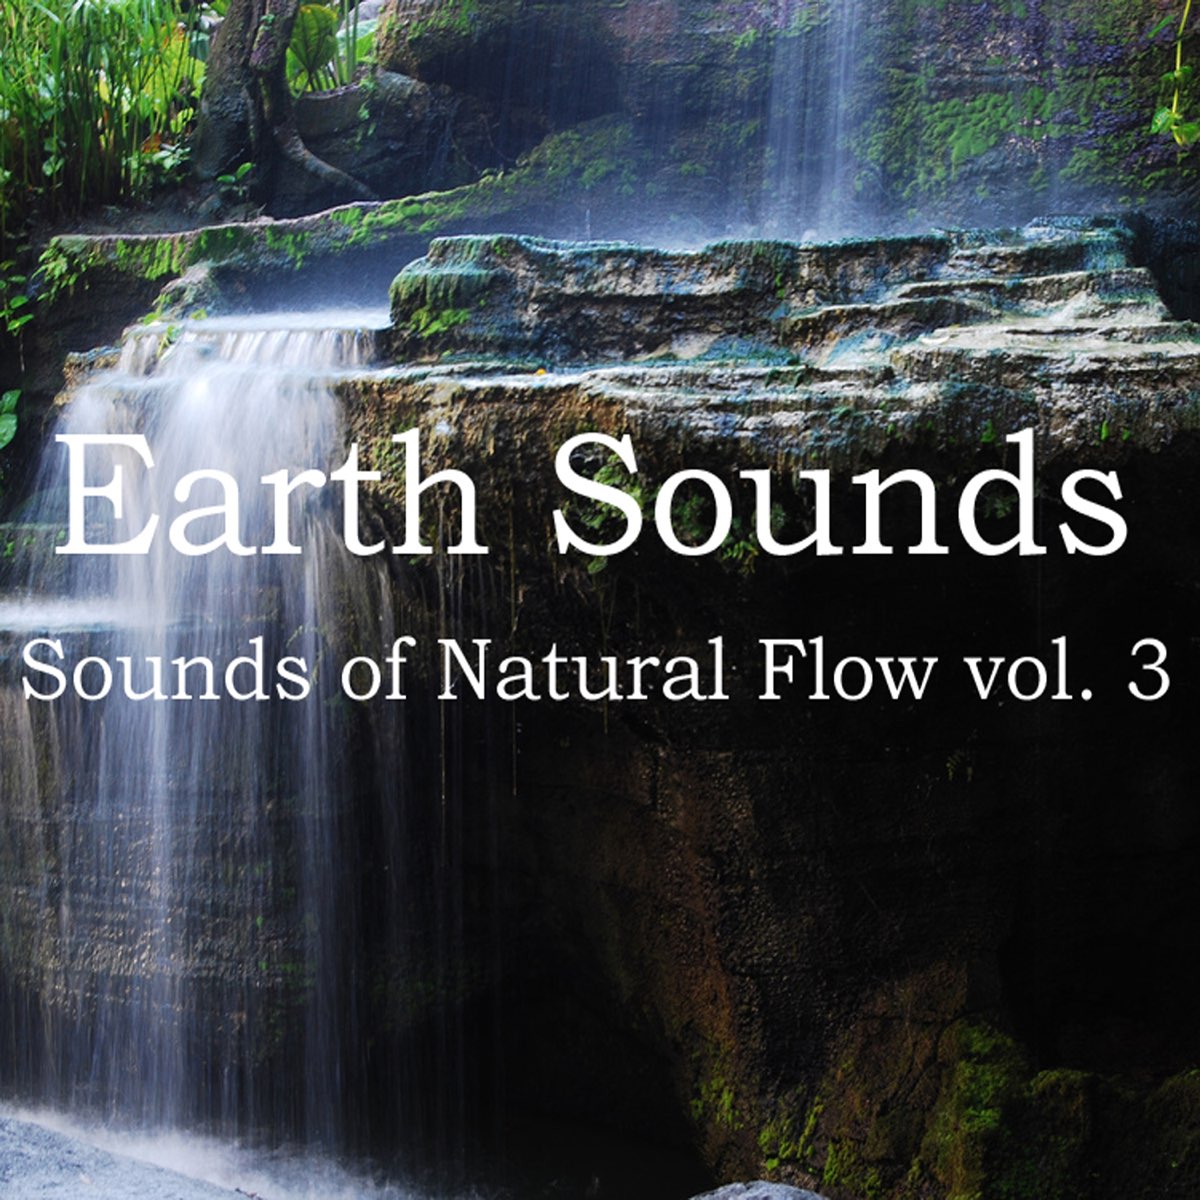 Earth Flow. Earth Sound. Earth sounding. Pebbles - Prophetic Flows Vol i & II. Natural flow